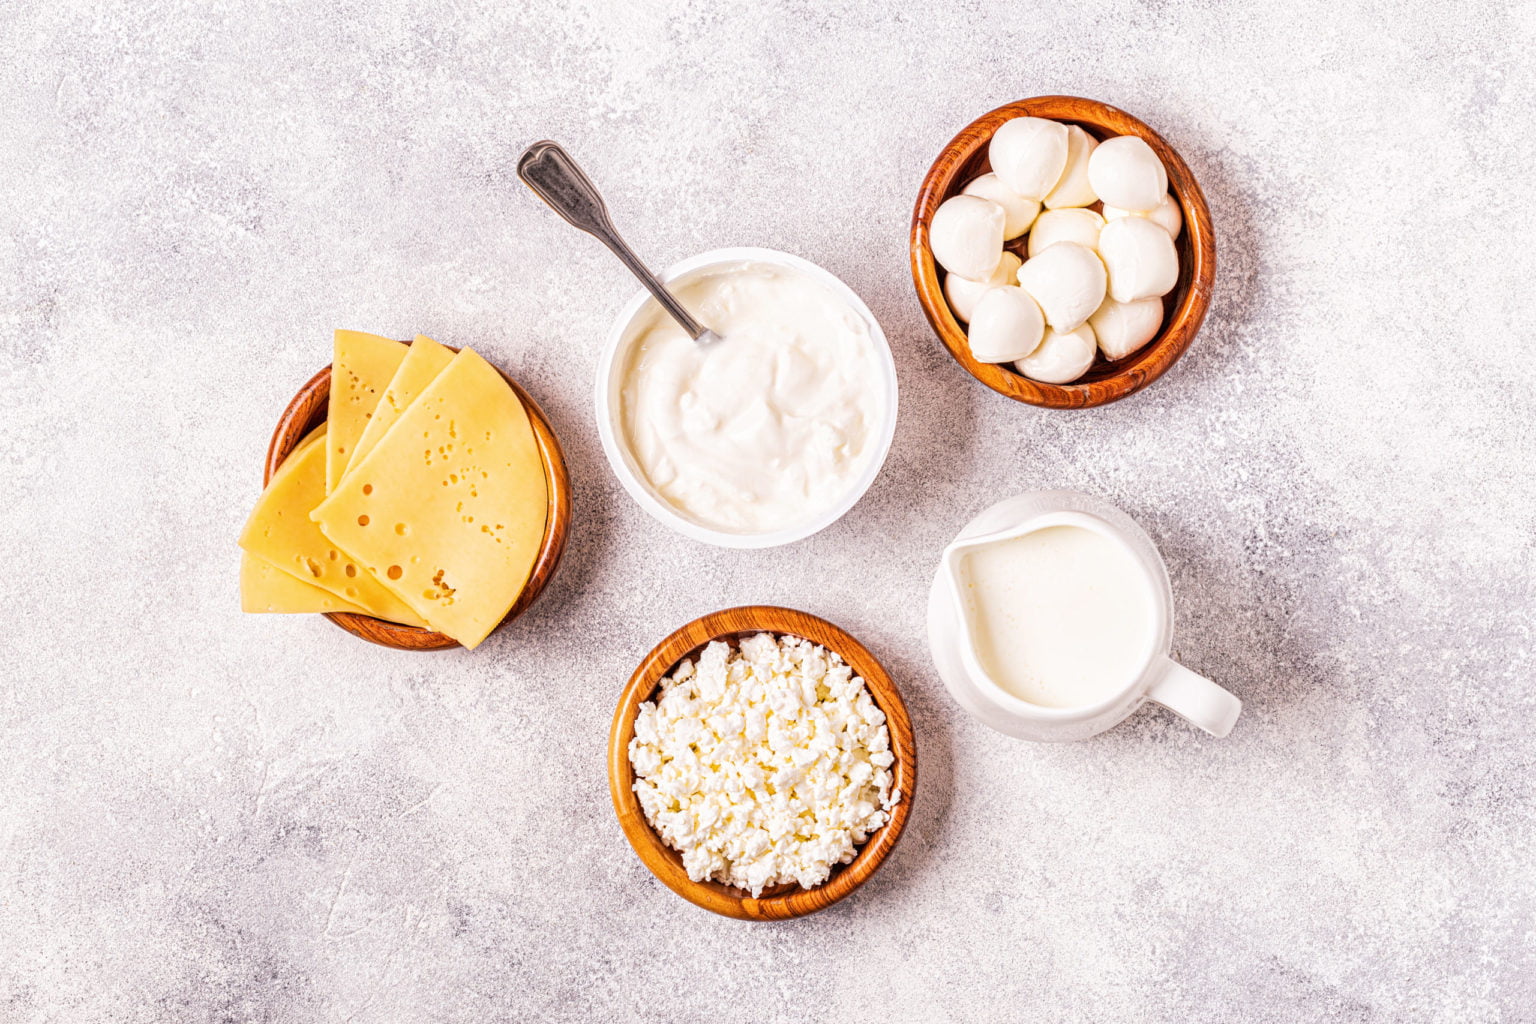 Probiotics fermented dairy products.